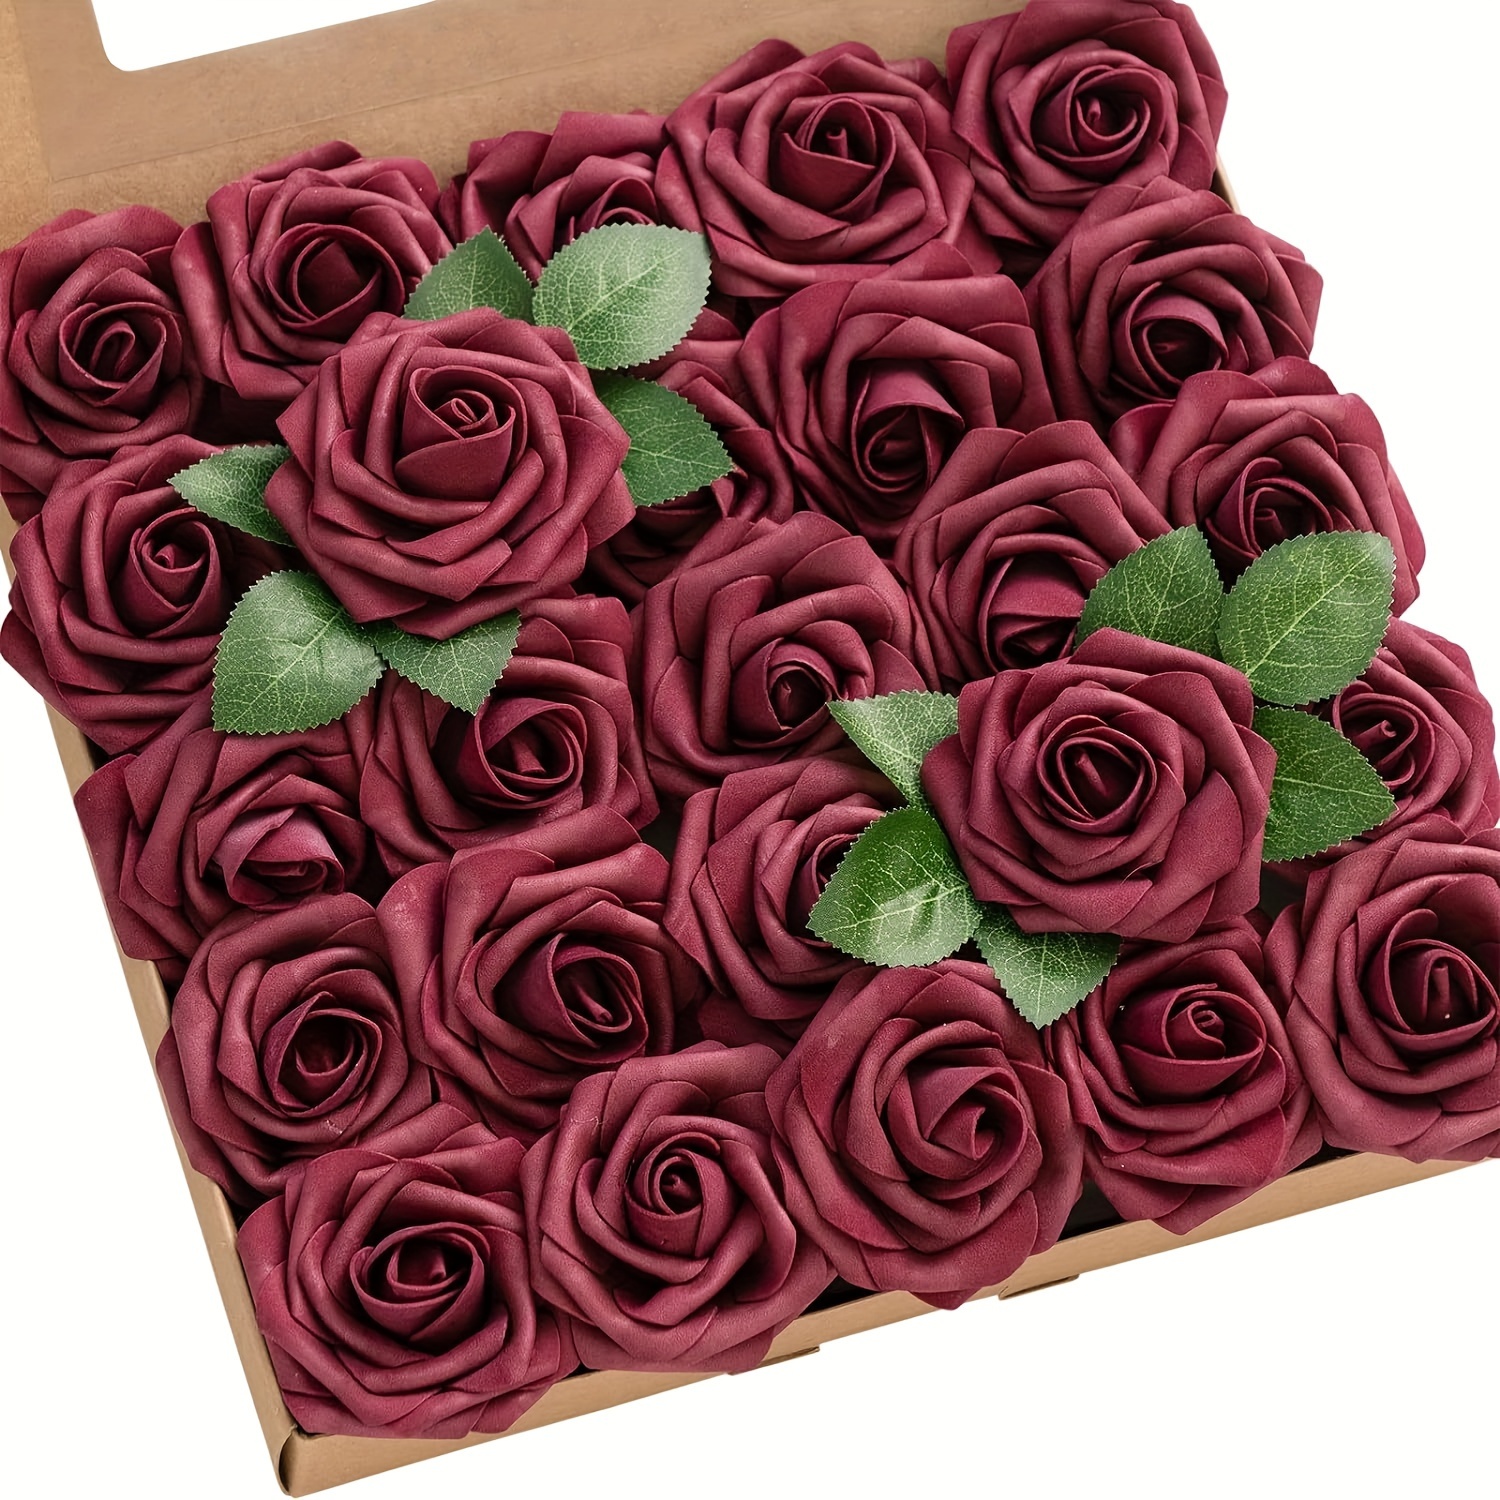 

25pcs Real Touch Burgundy Rose Arrangement: Perfect For Home, Wedding, Office, Cafe Decor And Gifts!